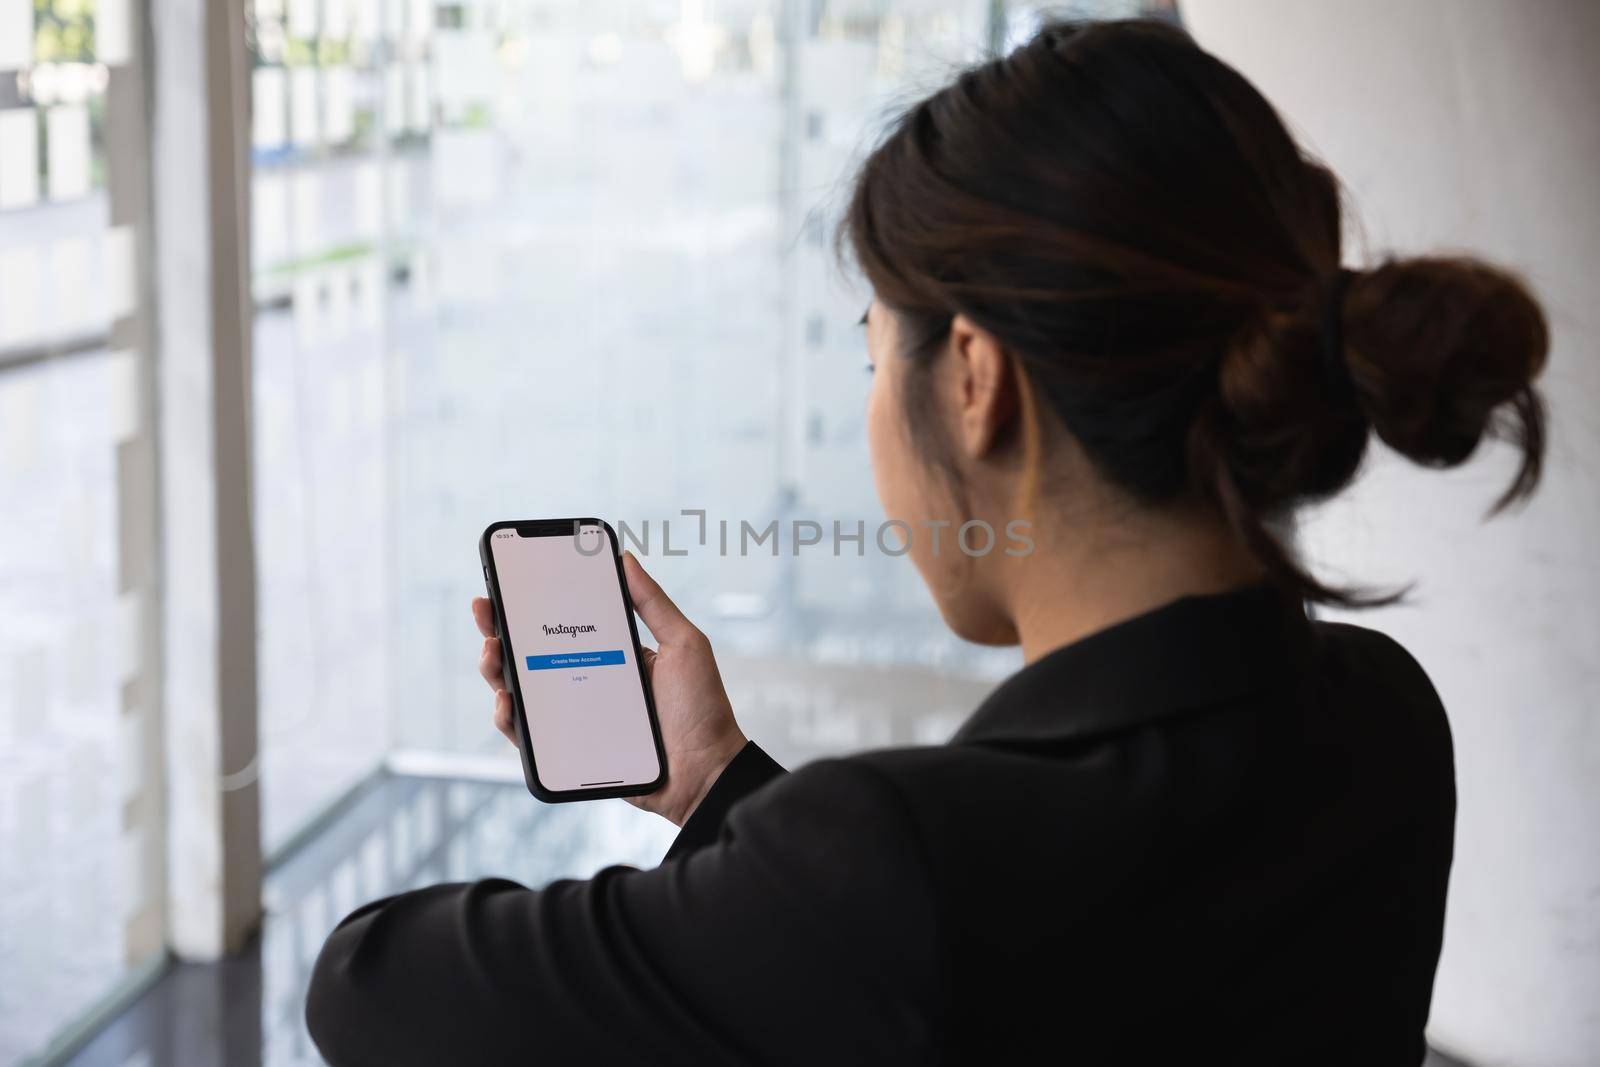 CHIANG MAI, THAILAND - MAR 01, 2021: A woman hand holding iphone with login screen of instagram application. Instagram is largest and most popular photograph social networking. by itchaznong